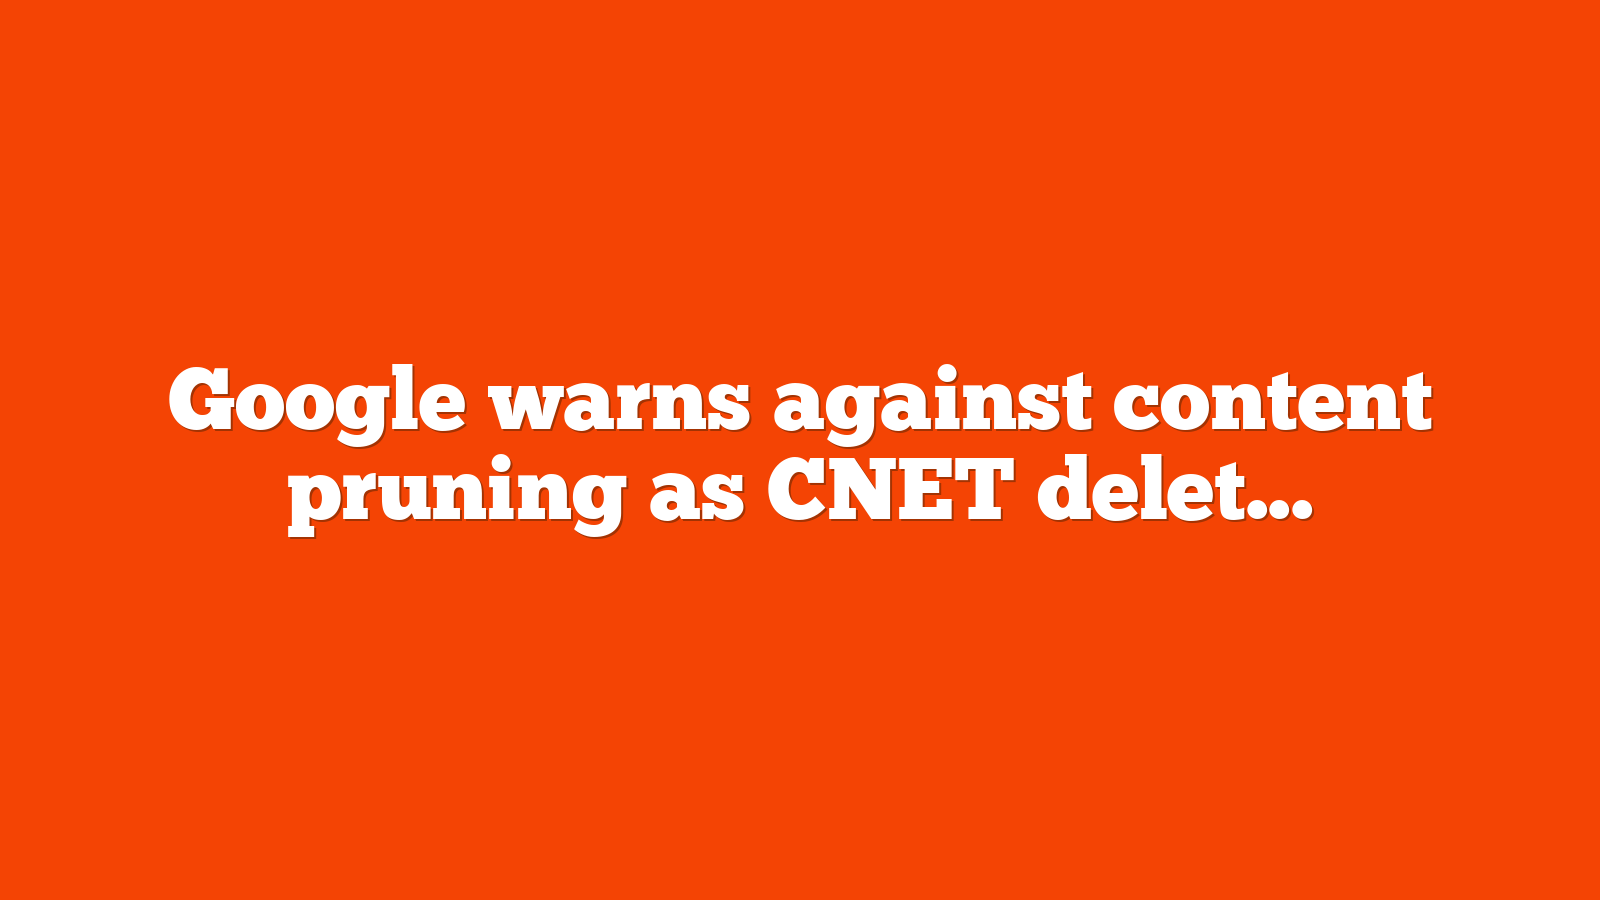 Google warns against content pruning as CNET deletes thousands of pages